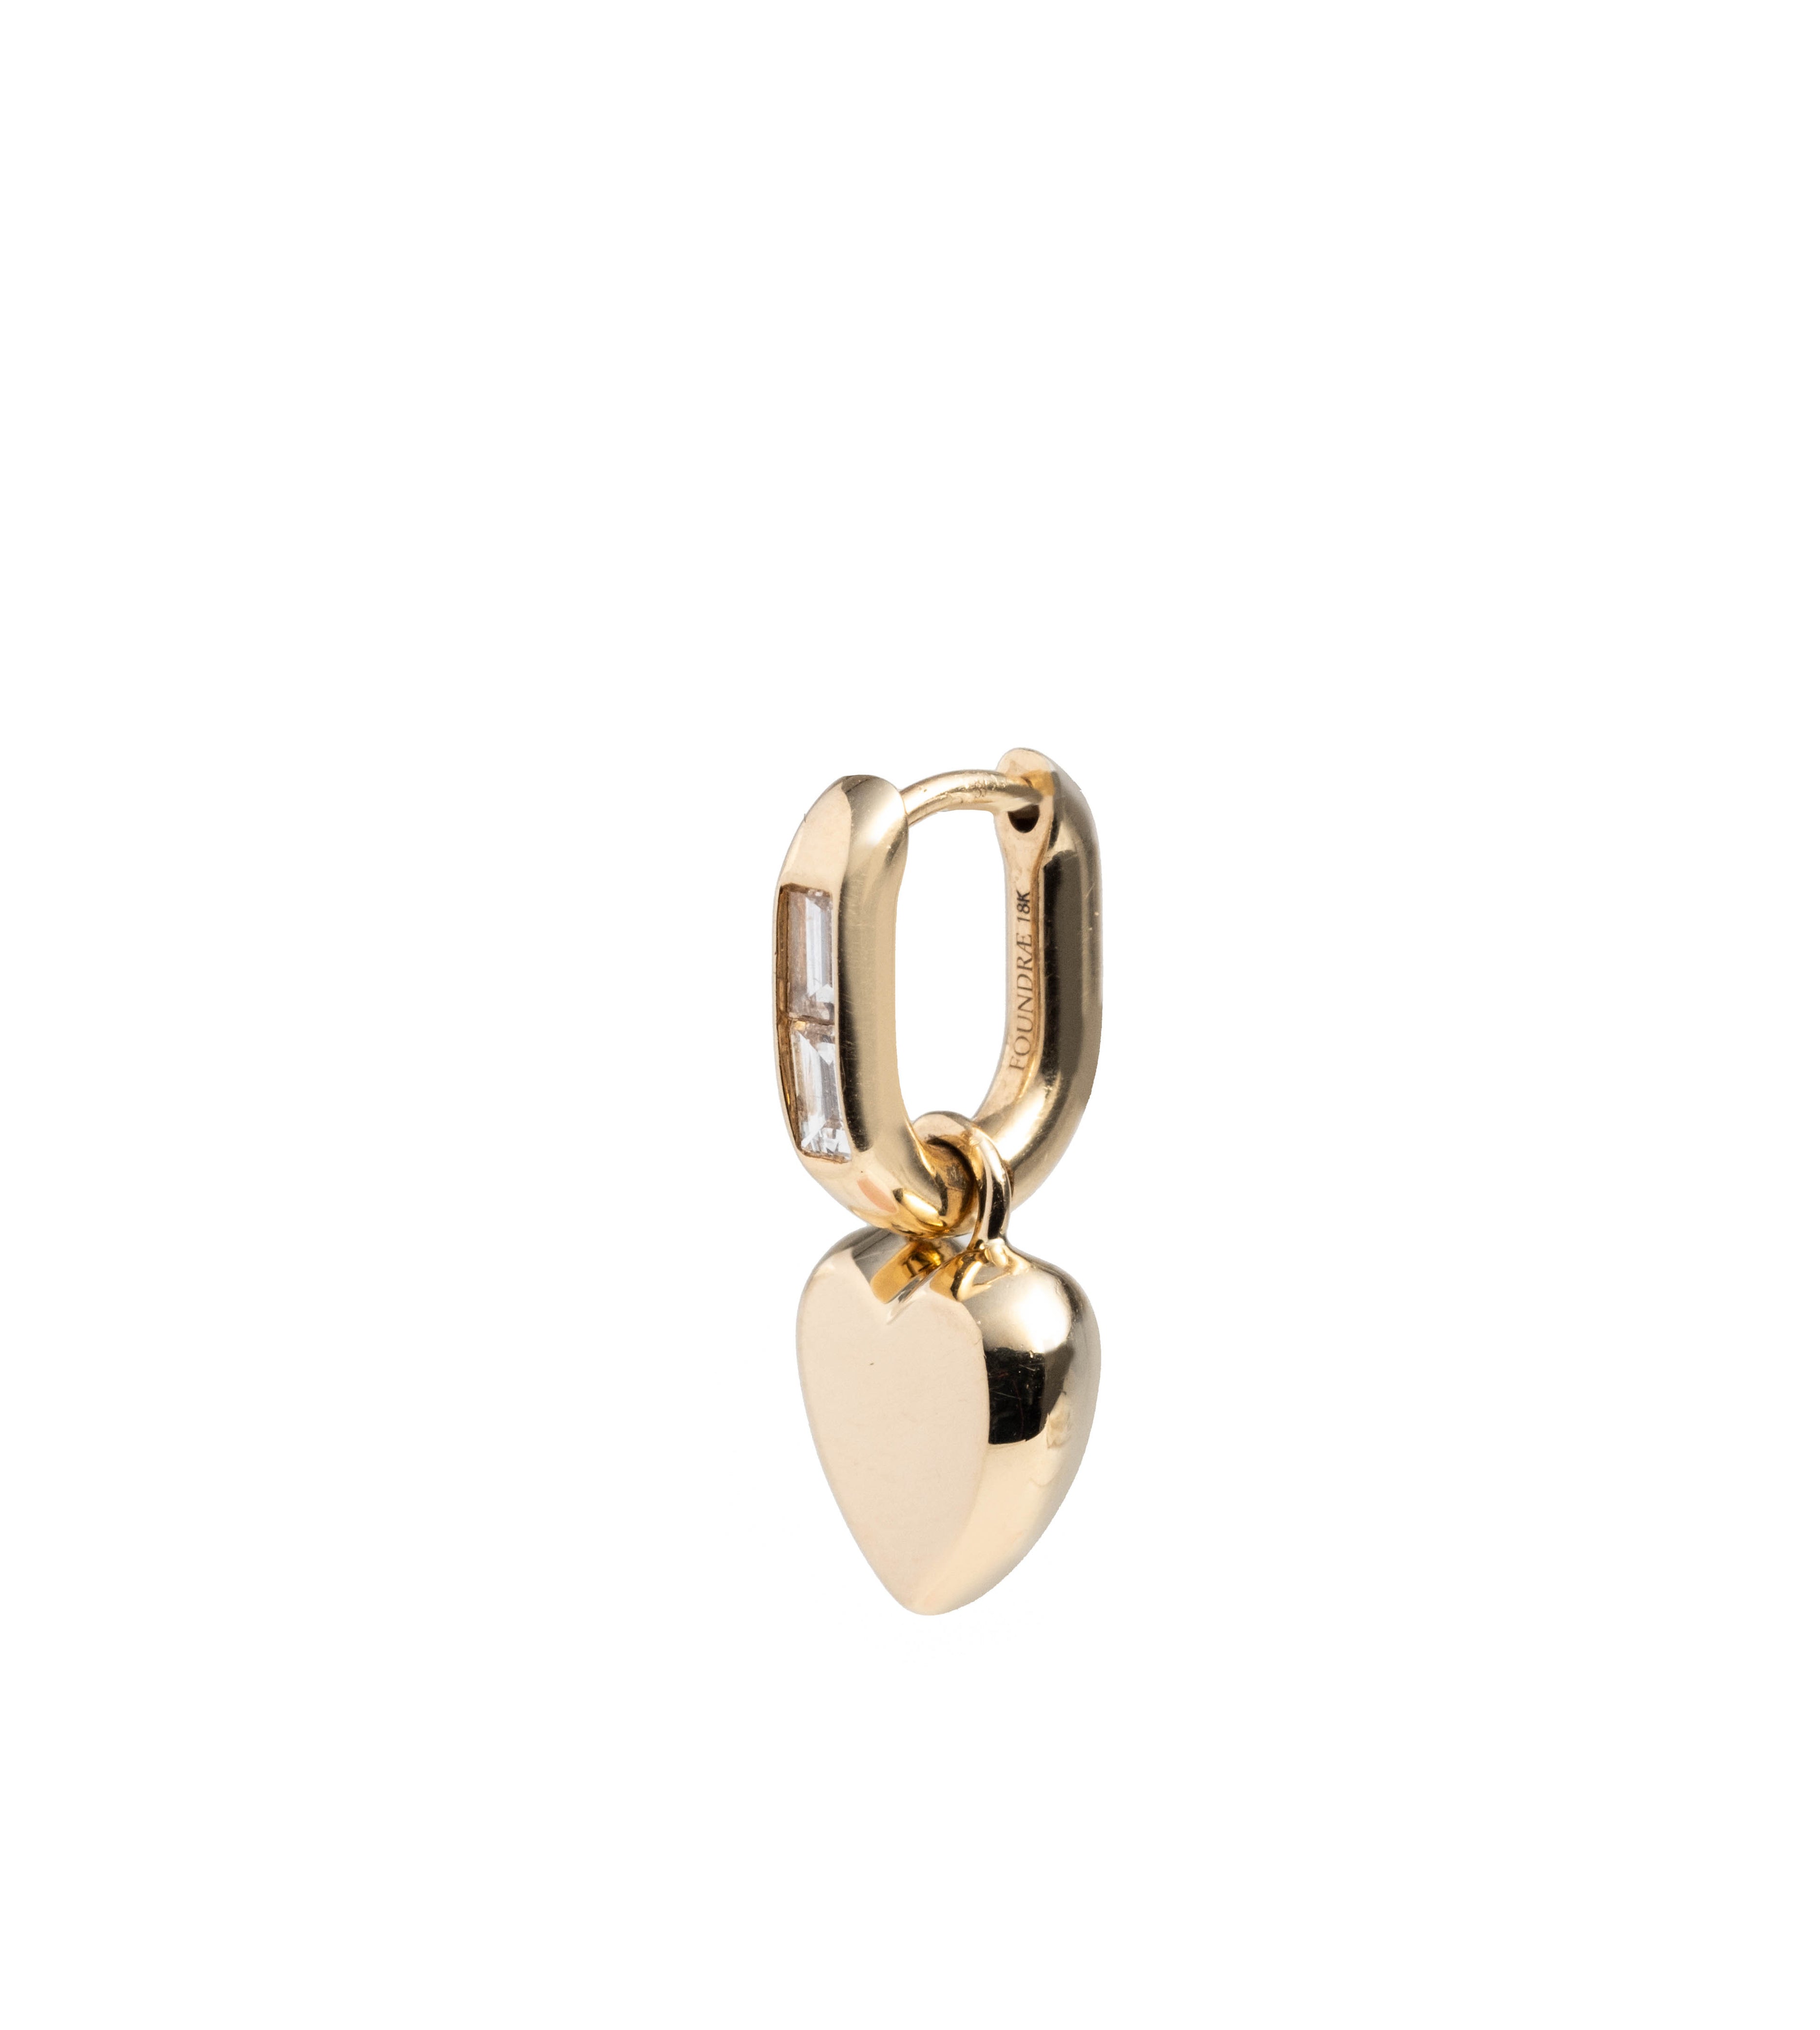 Initials & Numbers : Small Baguette Fob Earring